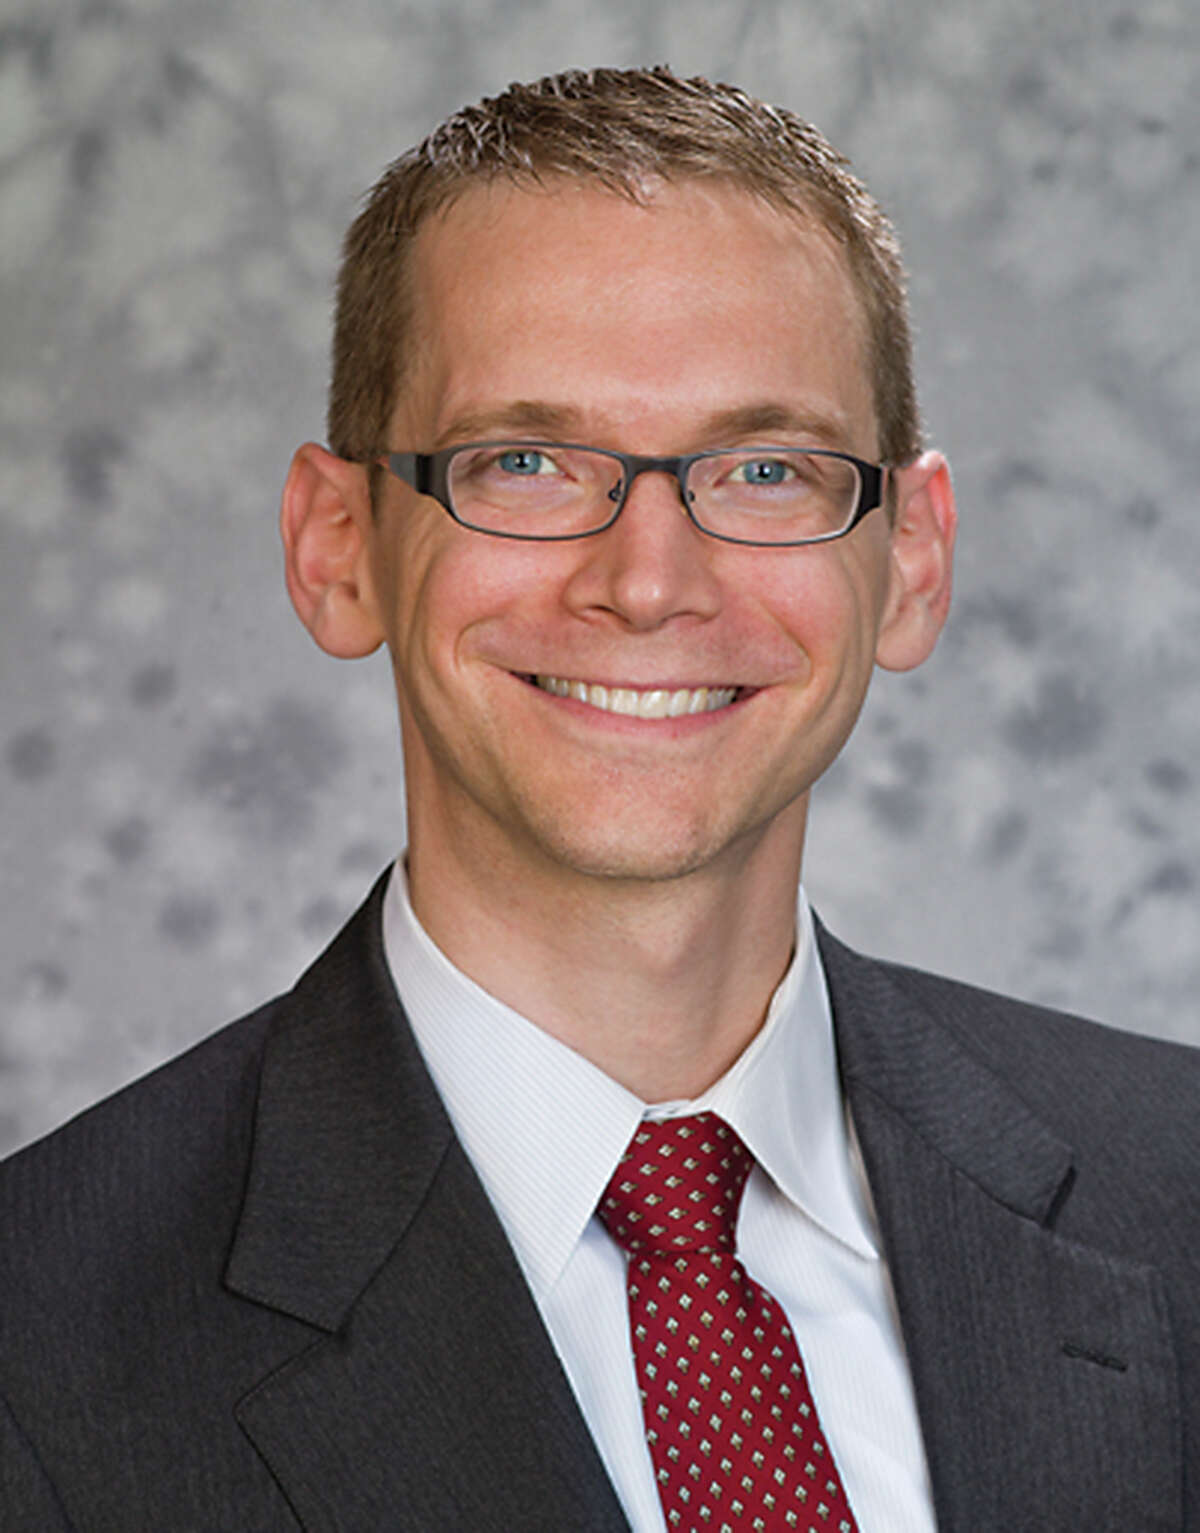 Mike Morath is Texas education commissioner.